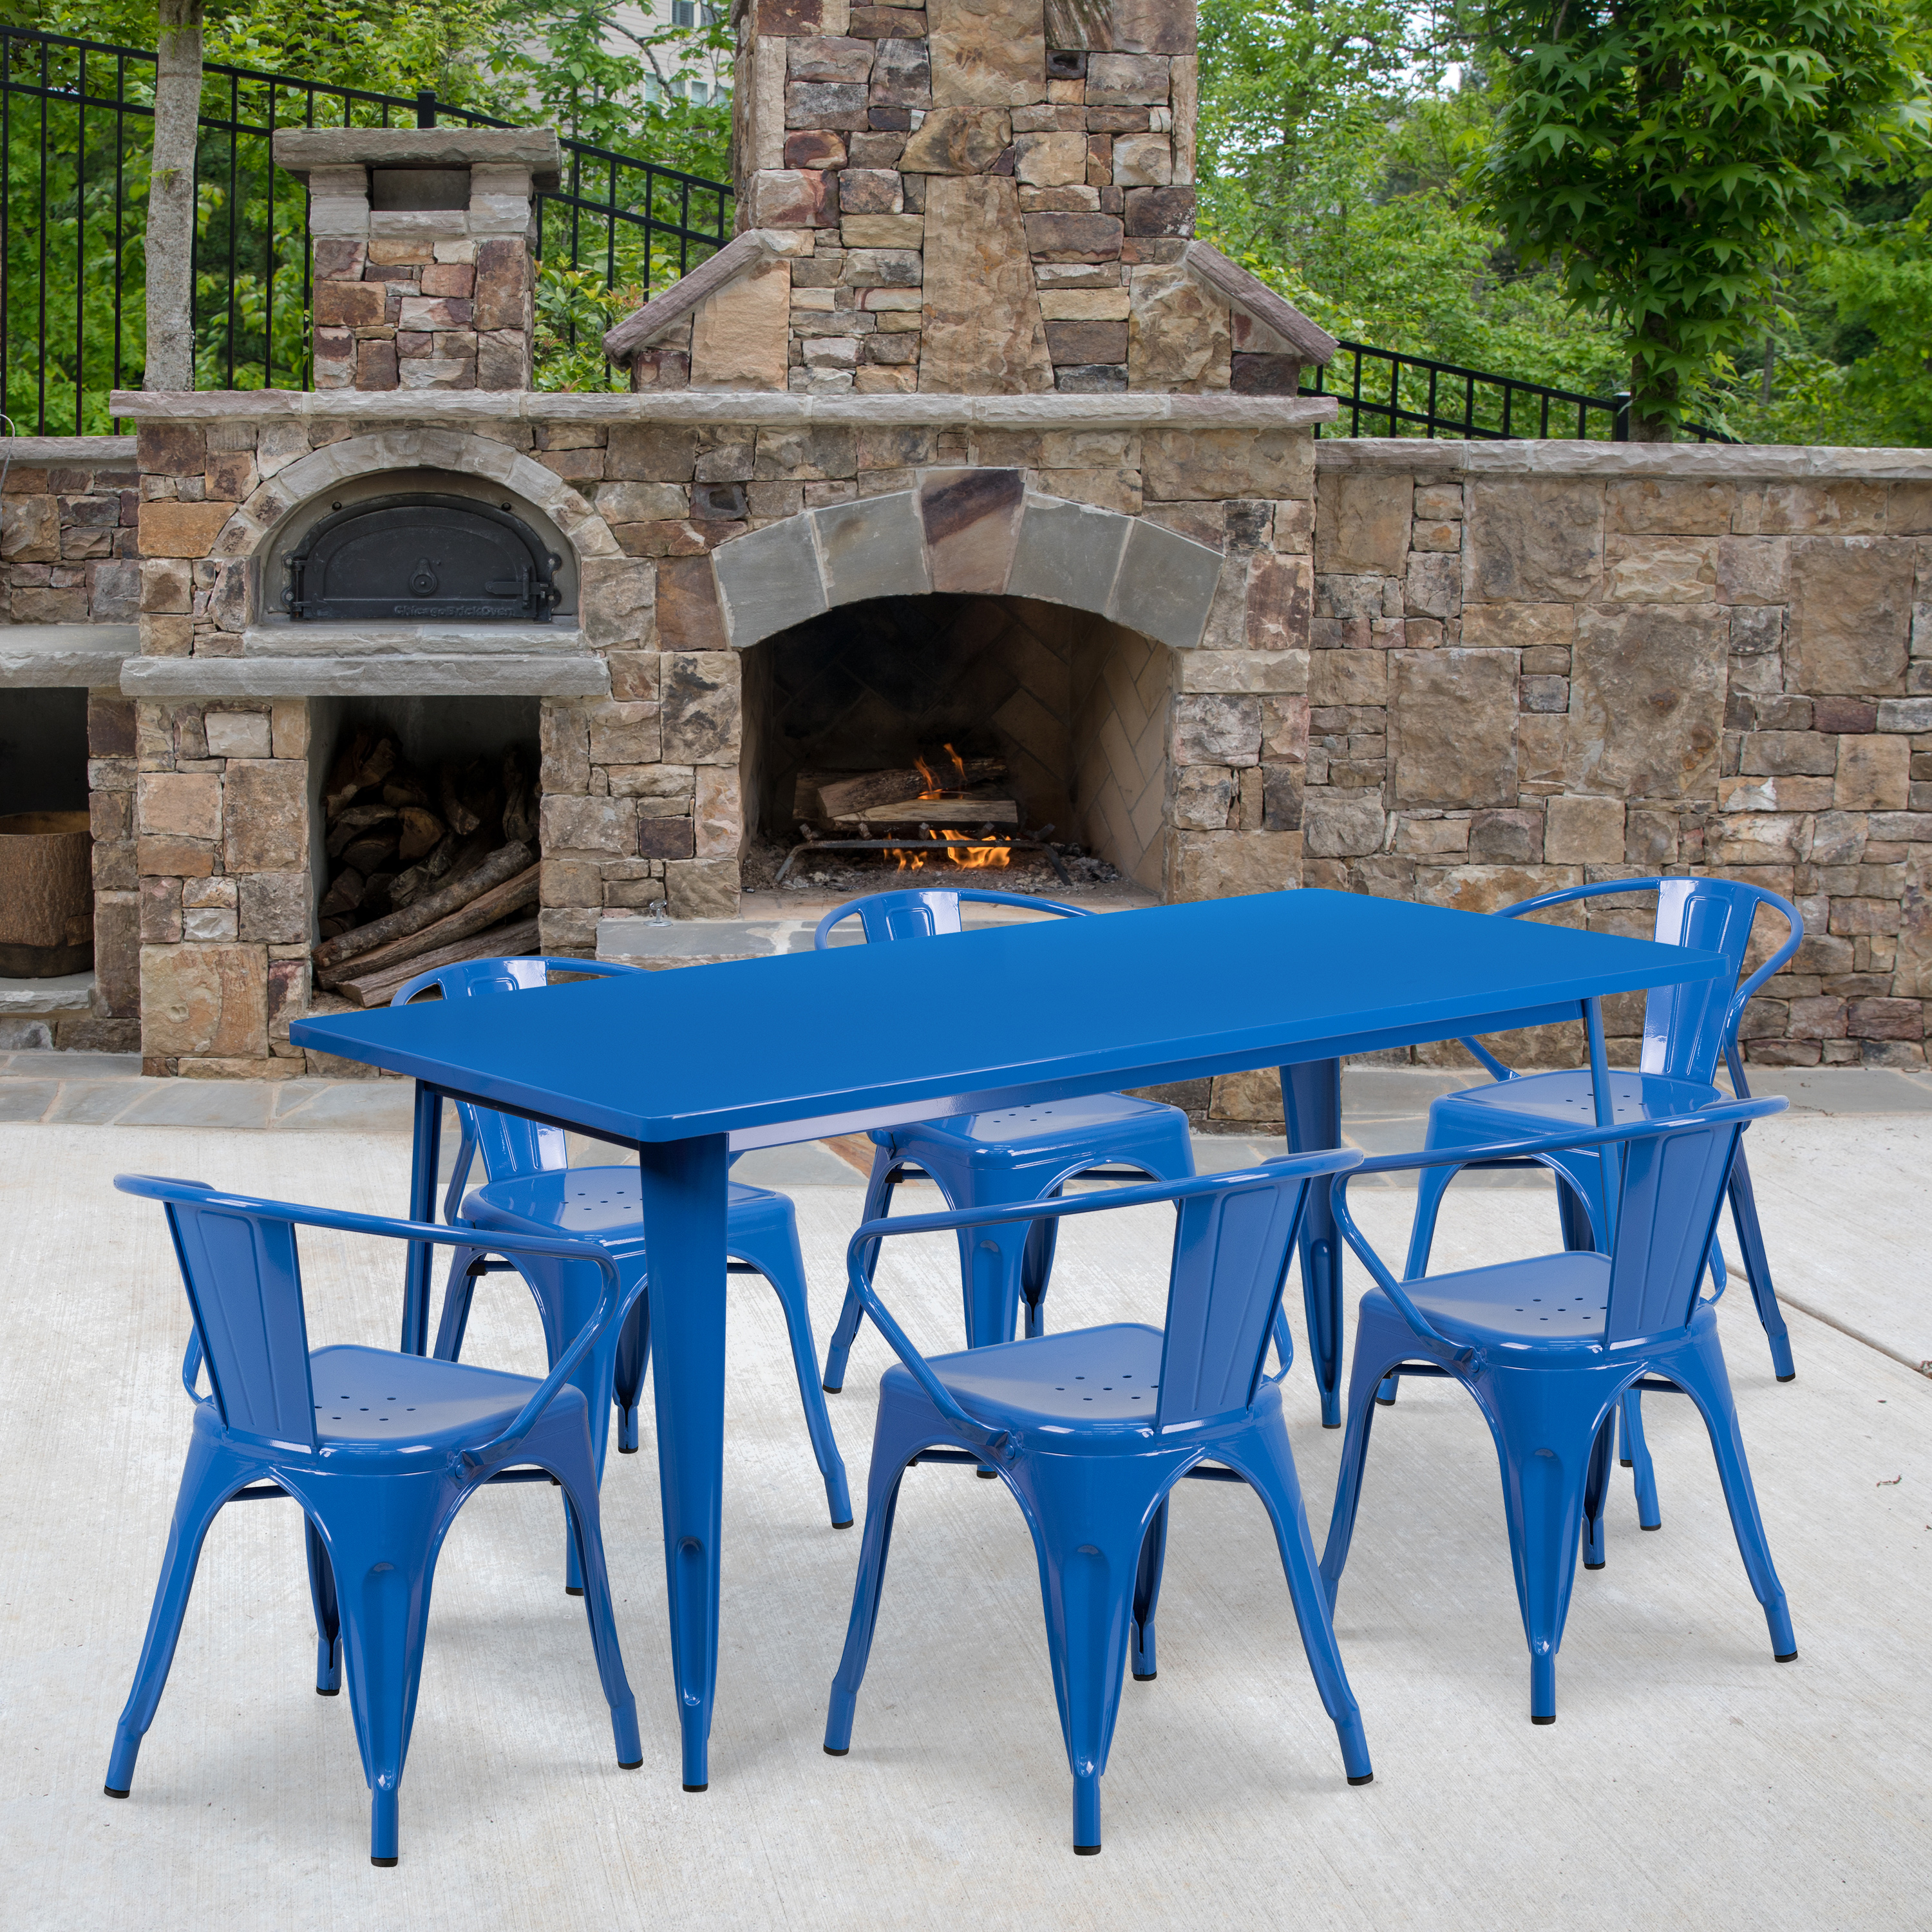 Emma + Oliver Commercial Grade Rectangular Blue Metal Indoor-Outdoor Table Set-6 Arm Chairs - image 1 of 5